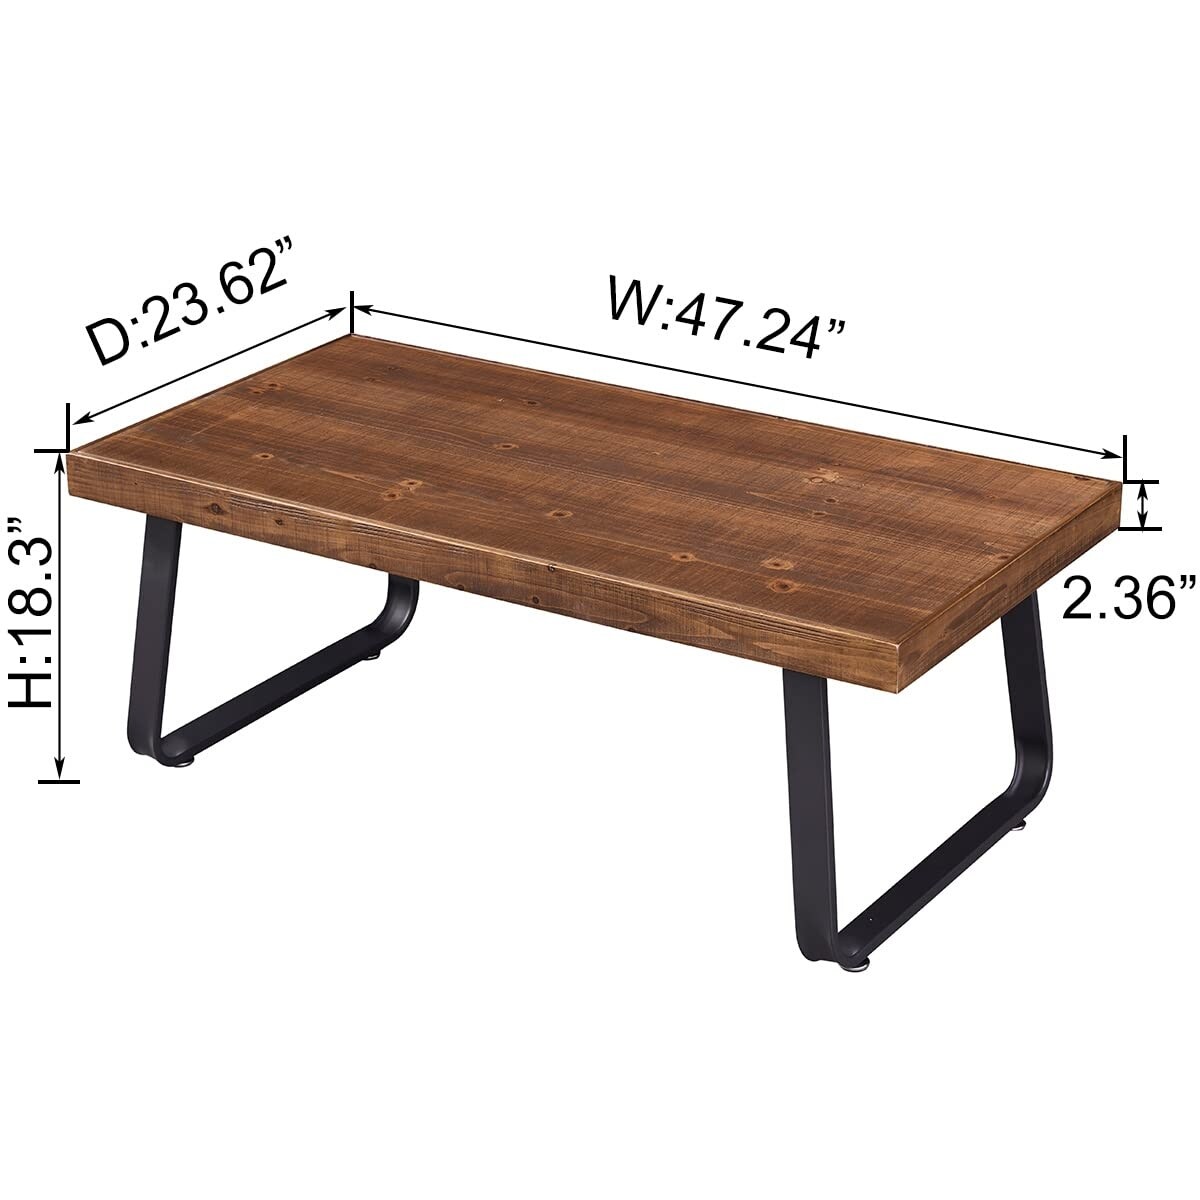 Natural Wood Coffee Table, Rustic Solid Wood Center Table for Living Room, Rectangle Metal and Real Wood Tea Table